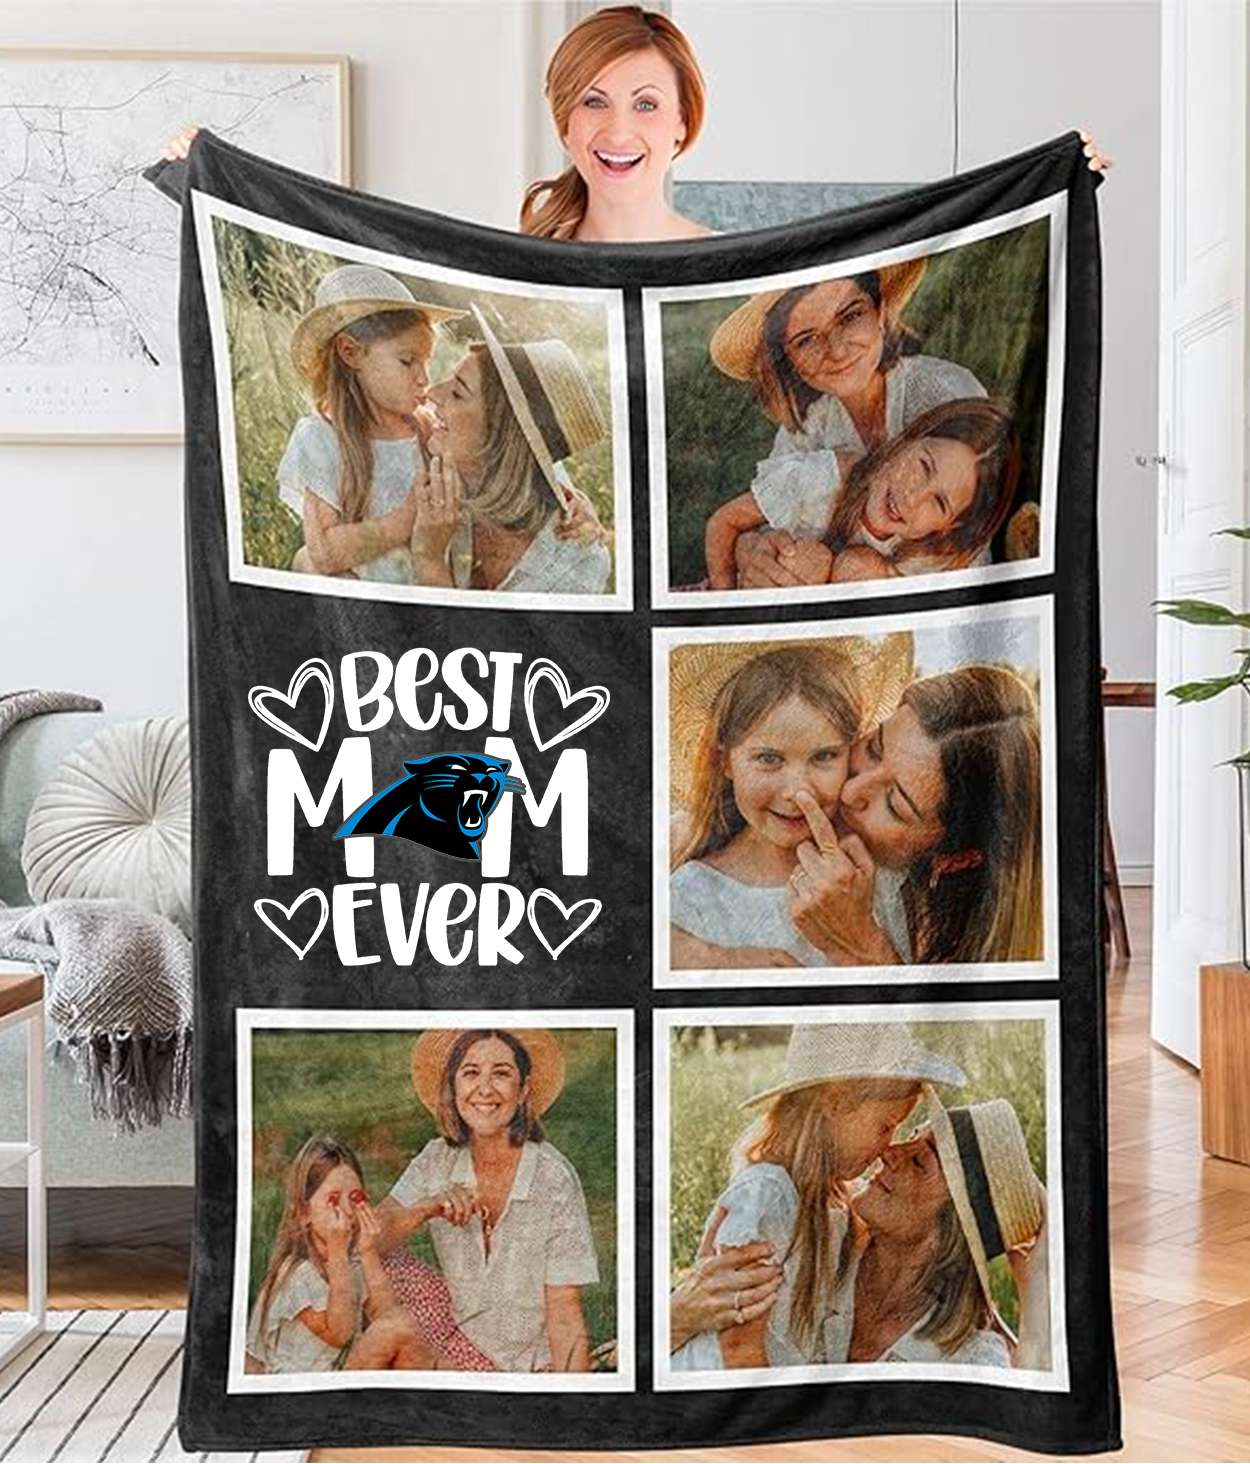 Best Mom Ever - Custom NFL Carolina Panthers Blankets with Pictures for Mother's Day Gift